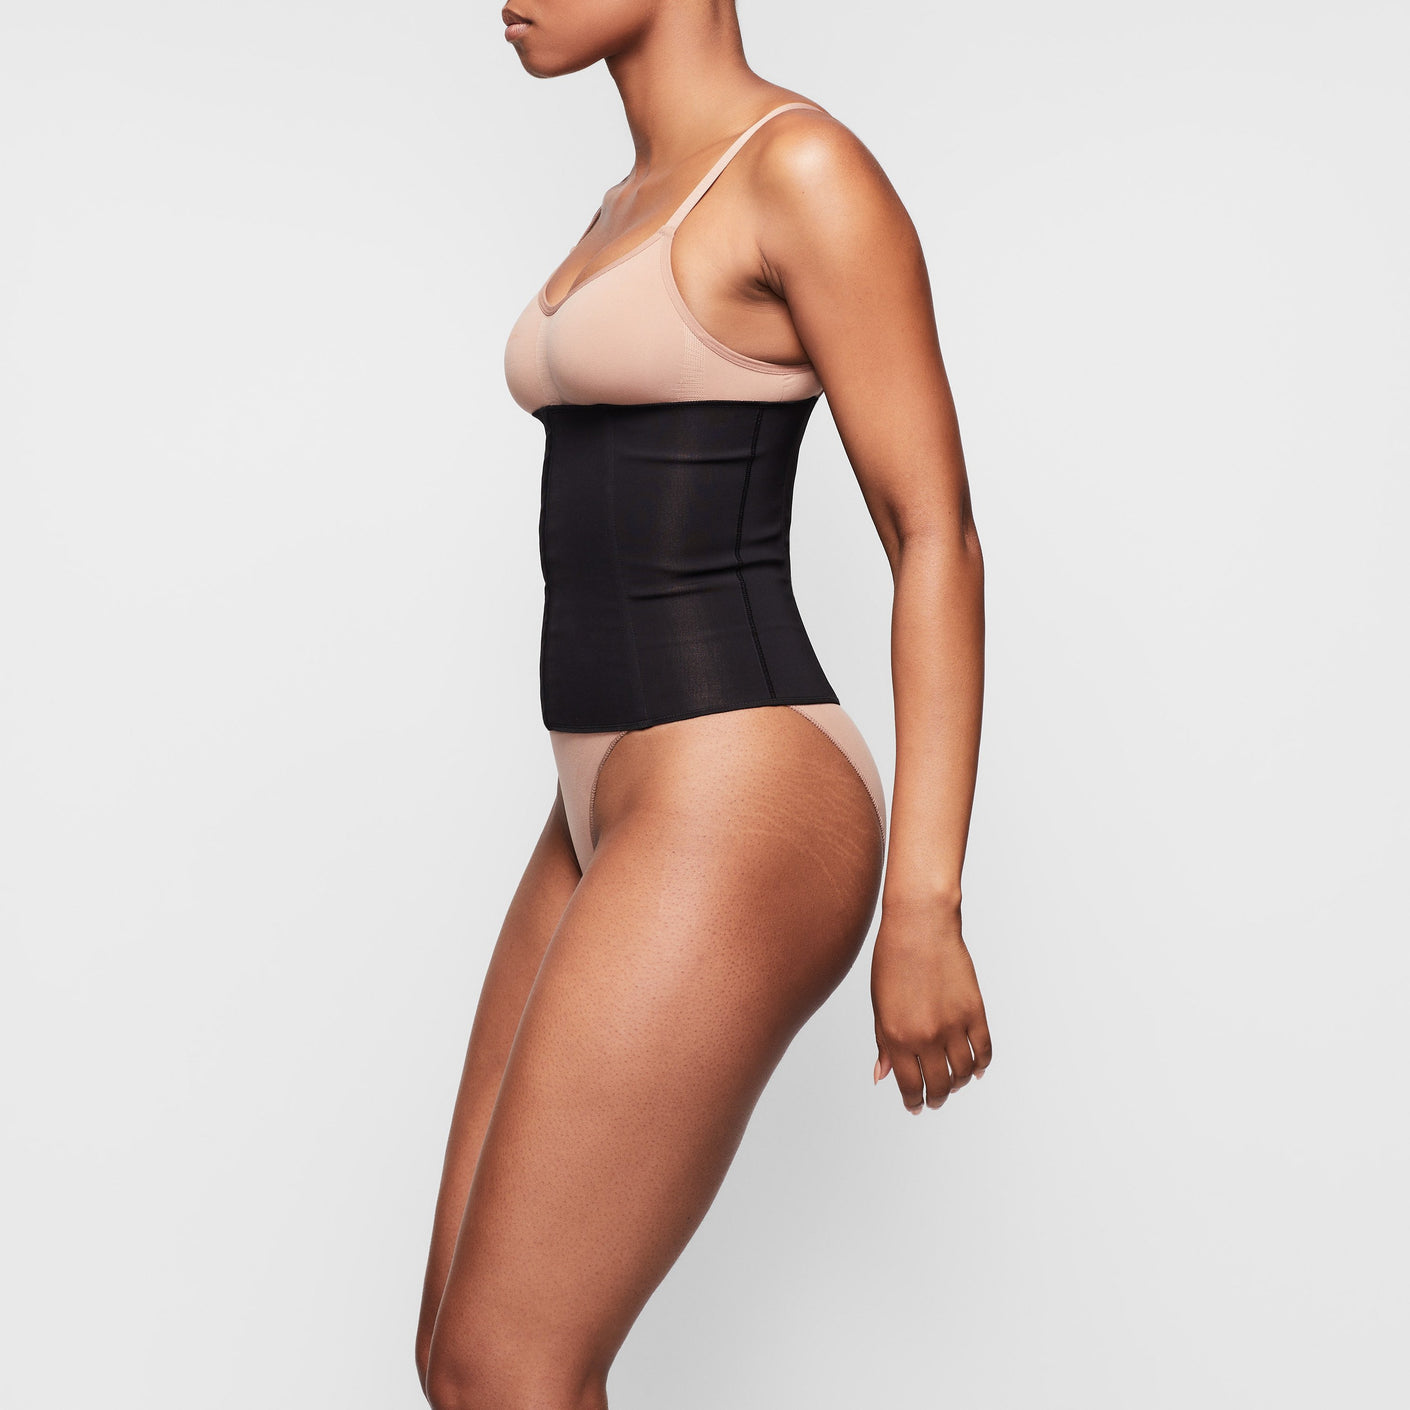 Waist Trainers and Bodysuits That Could Help Flatten Your Tummy